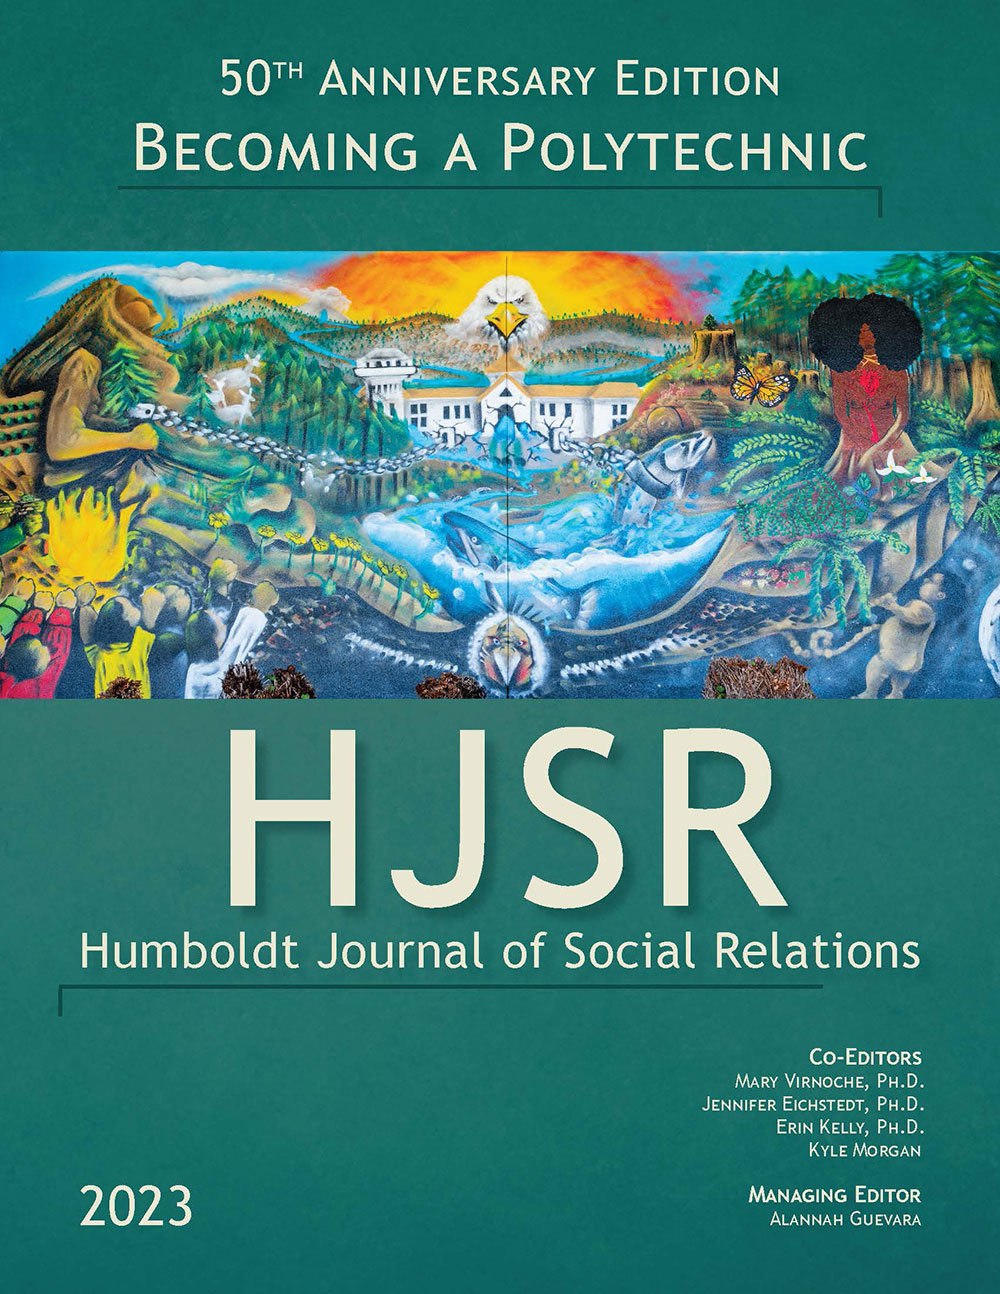 The cover of the Humboldt Journal of Social Relations 50th Anniversary Edition